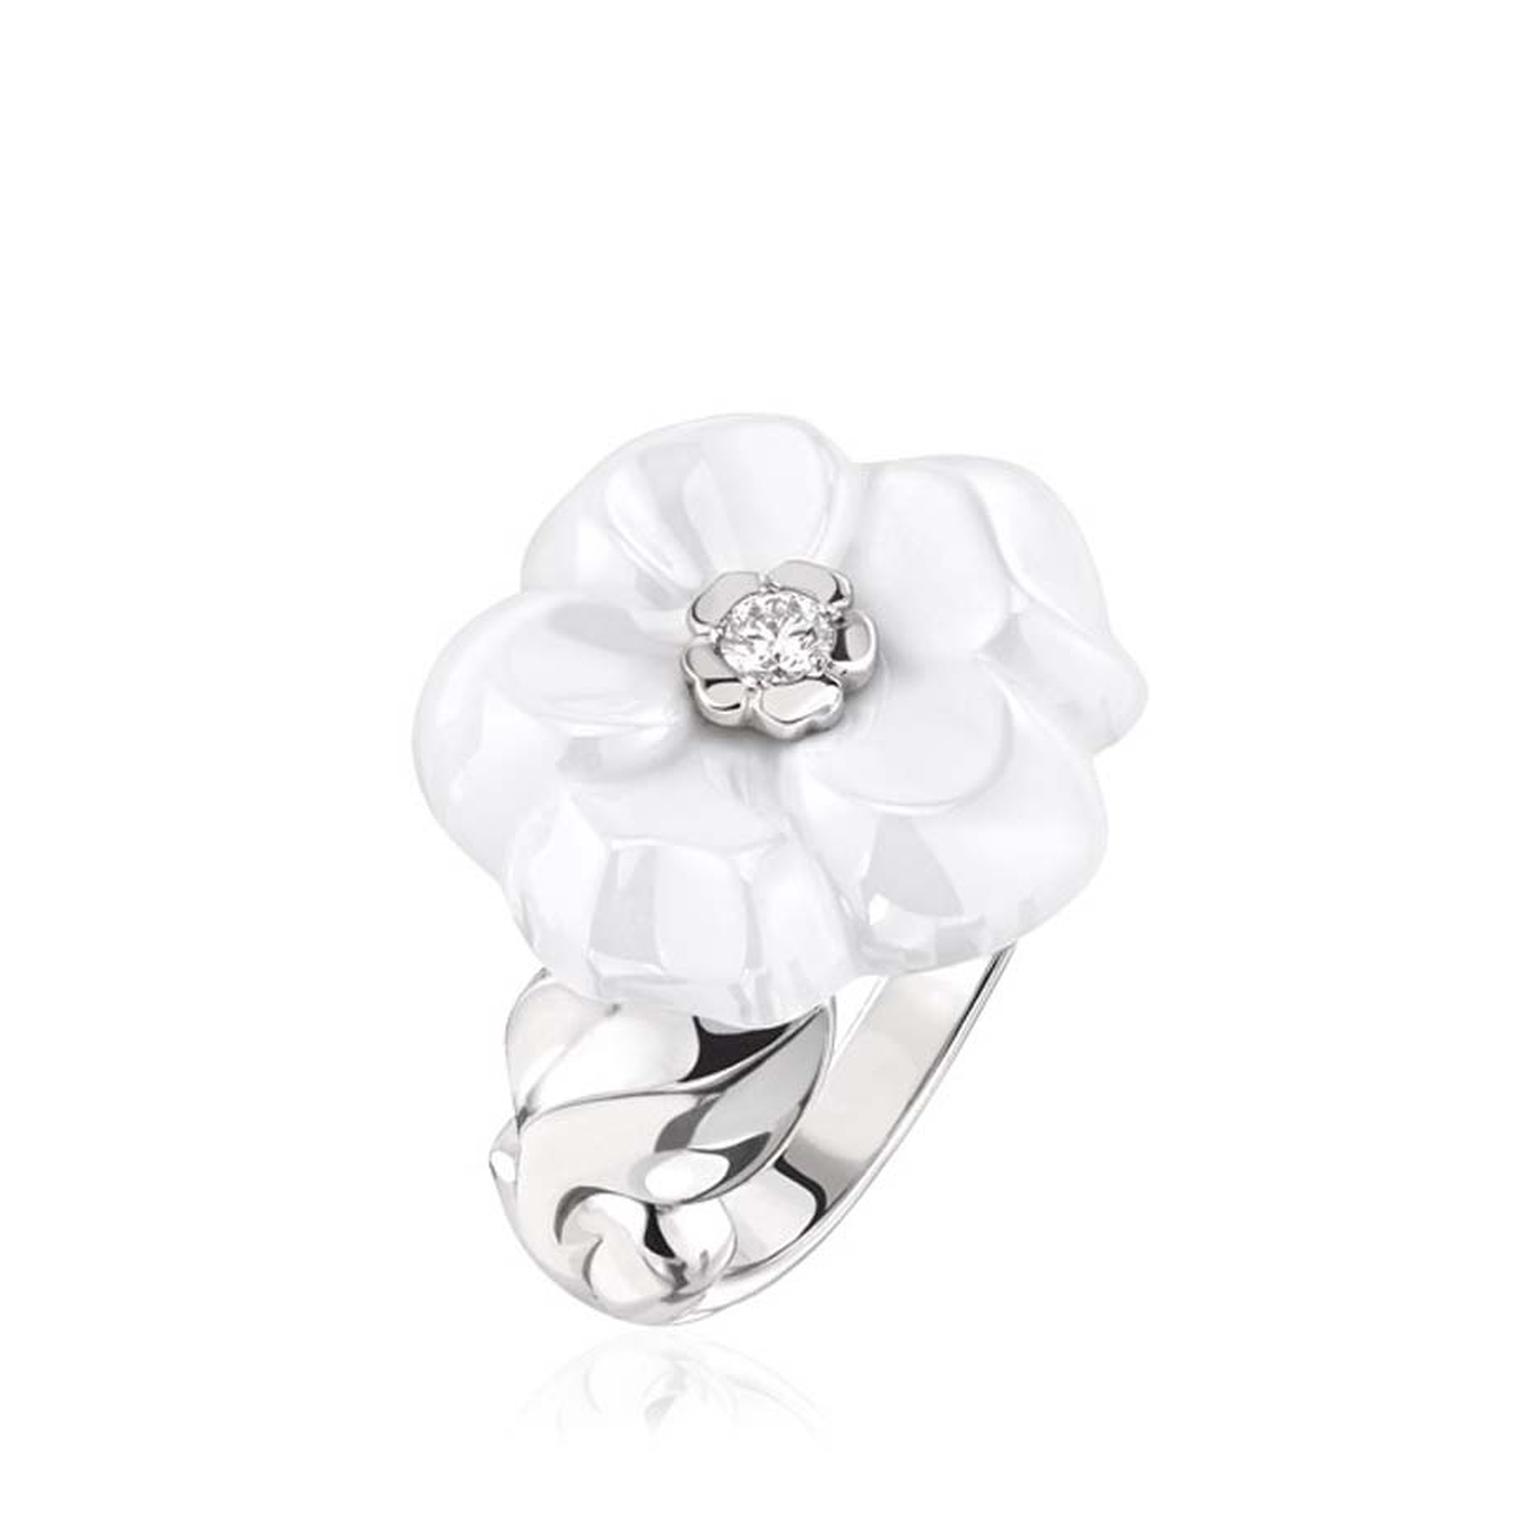 Chanel Camélia Galbé white ceramic ring, with a gleaming brilliant-cut diamond at its heart.